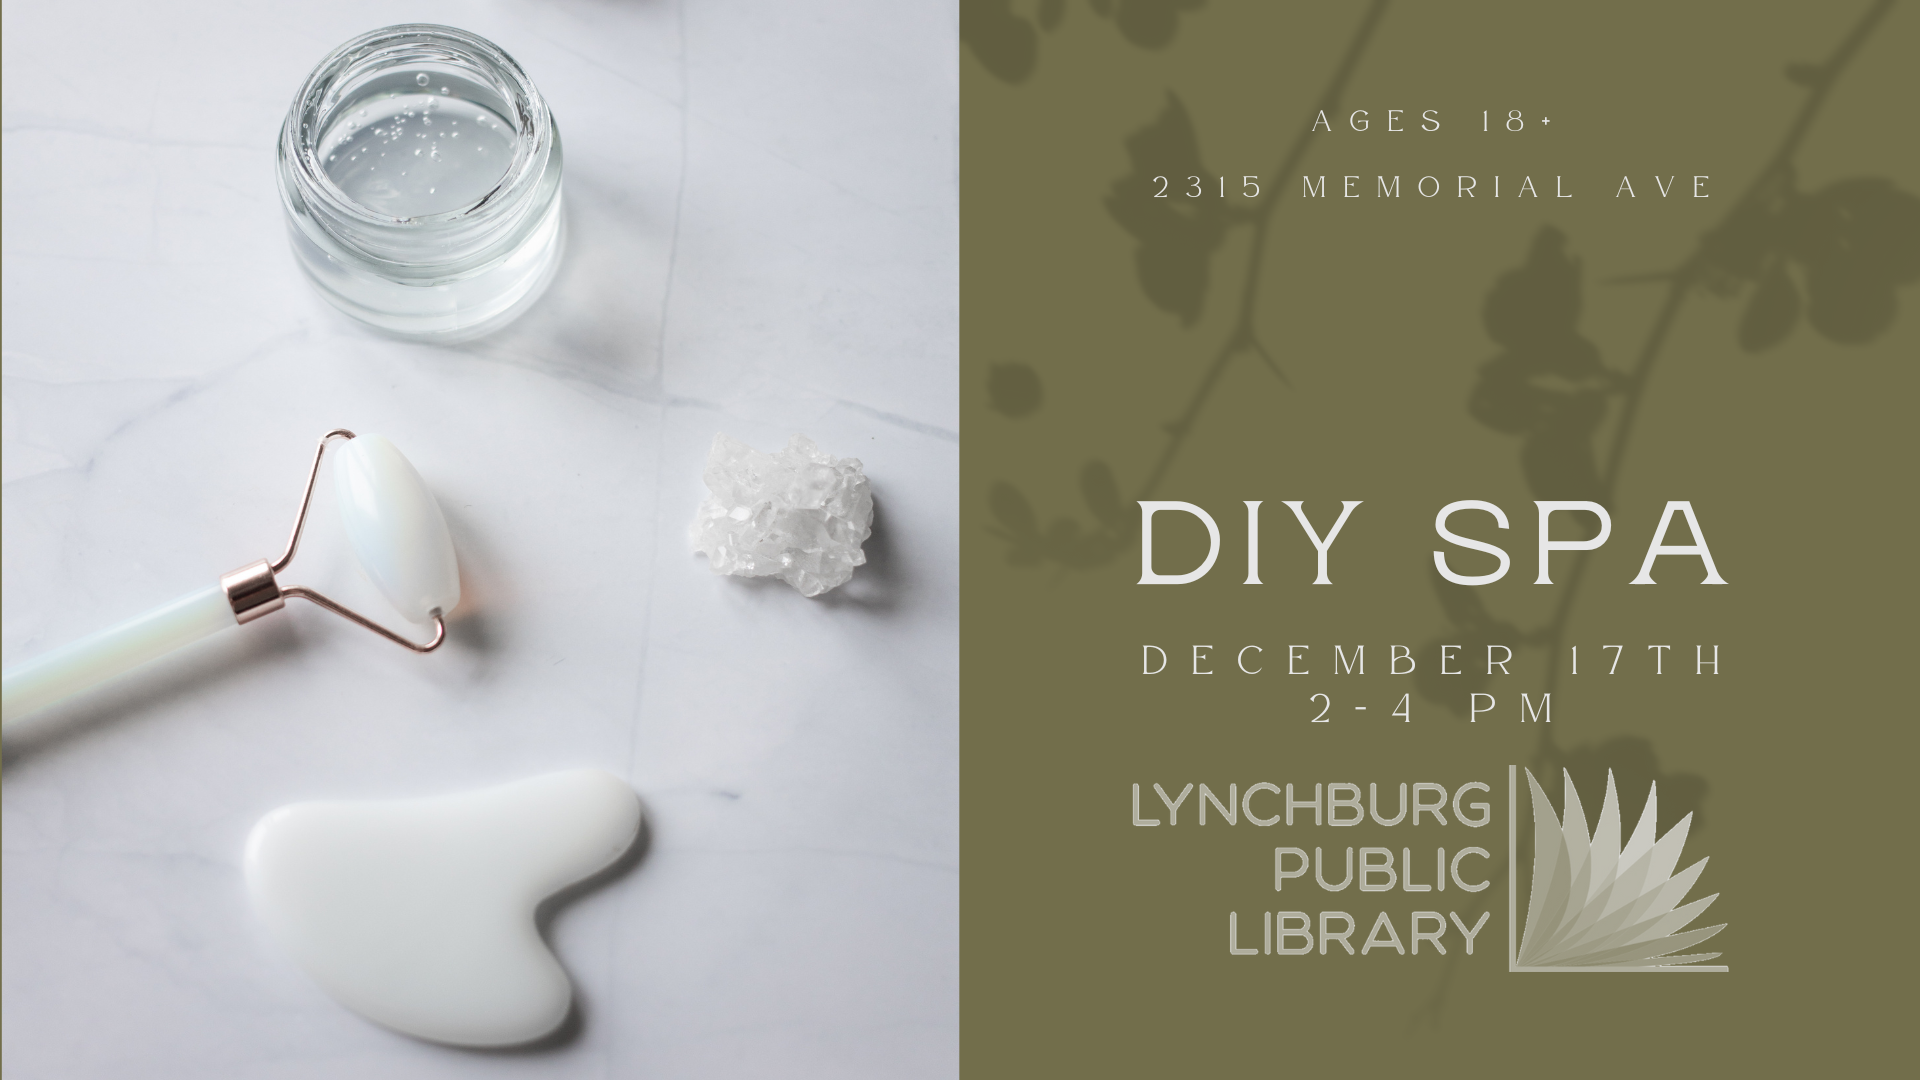 Ages 18+; 2315 Memorial Ave; DIY Spa; December 17th, 2-4 pm; Lynchburg Public Library